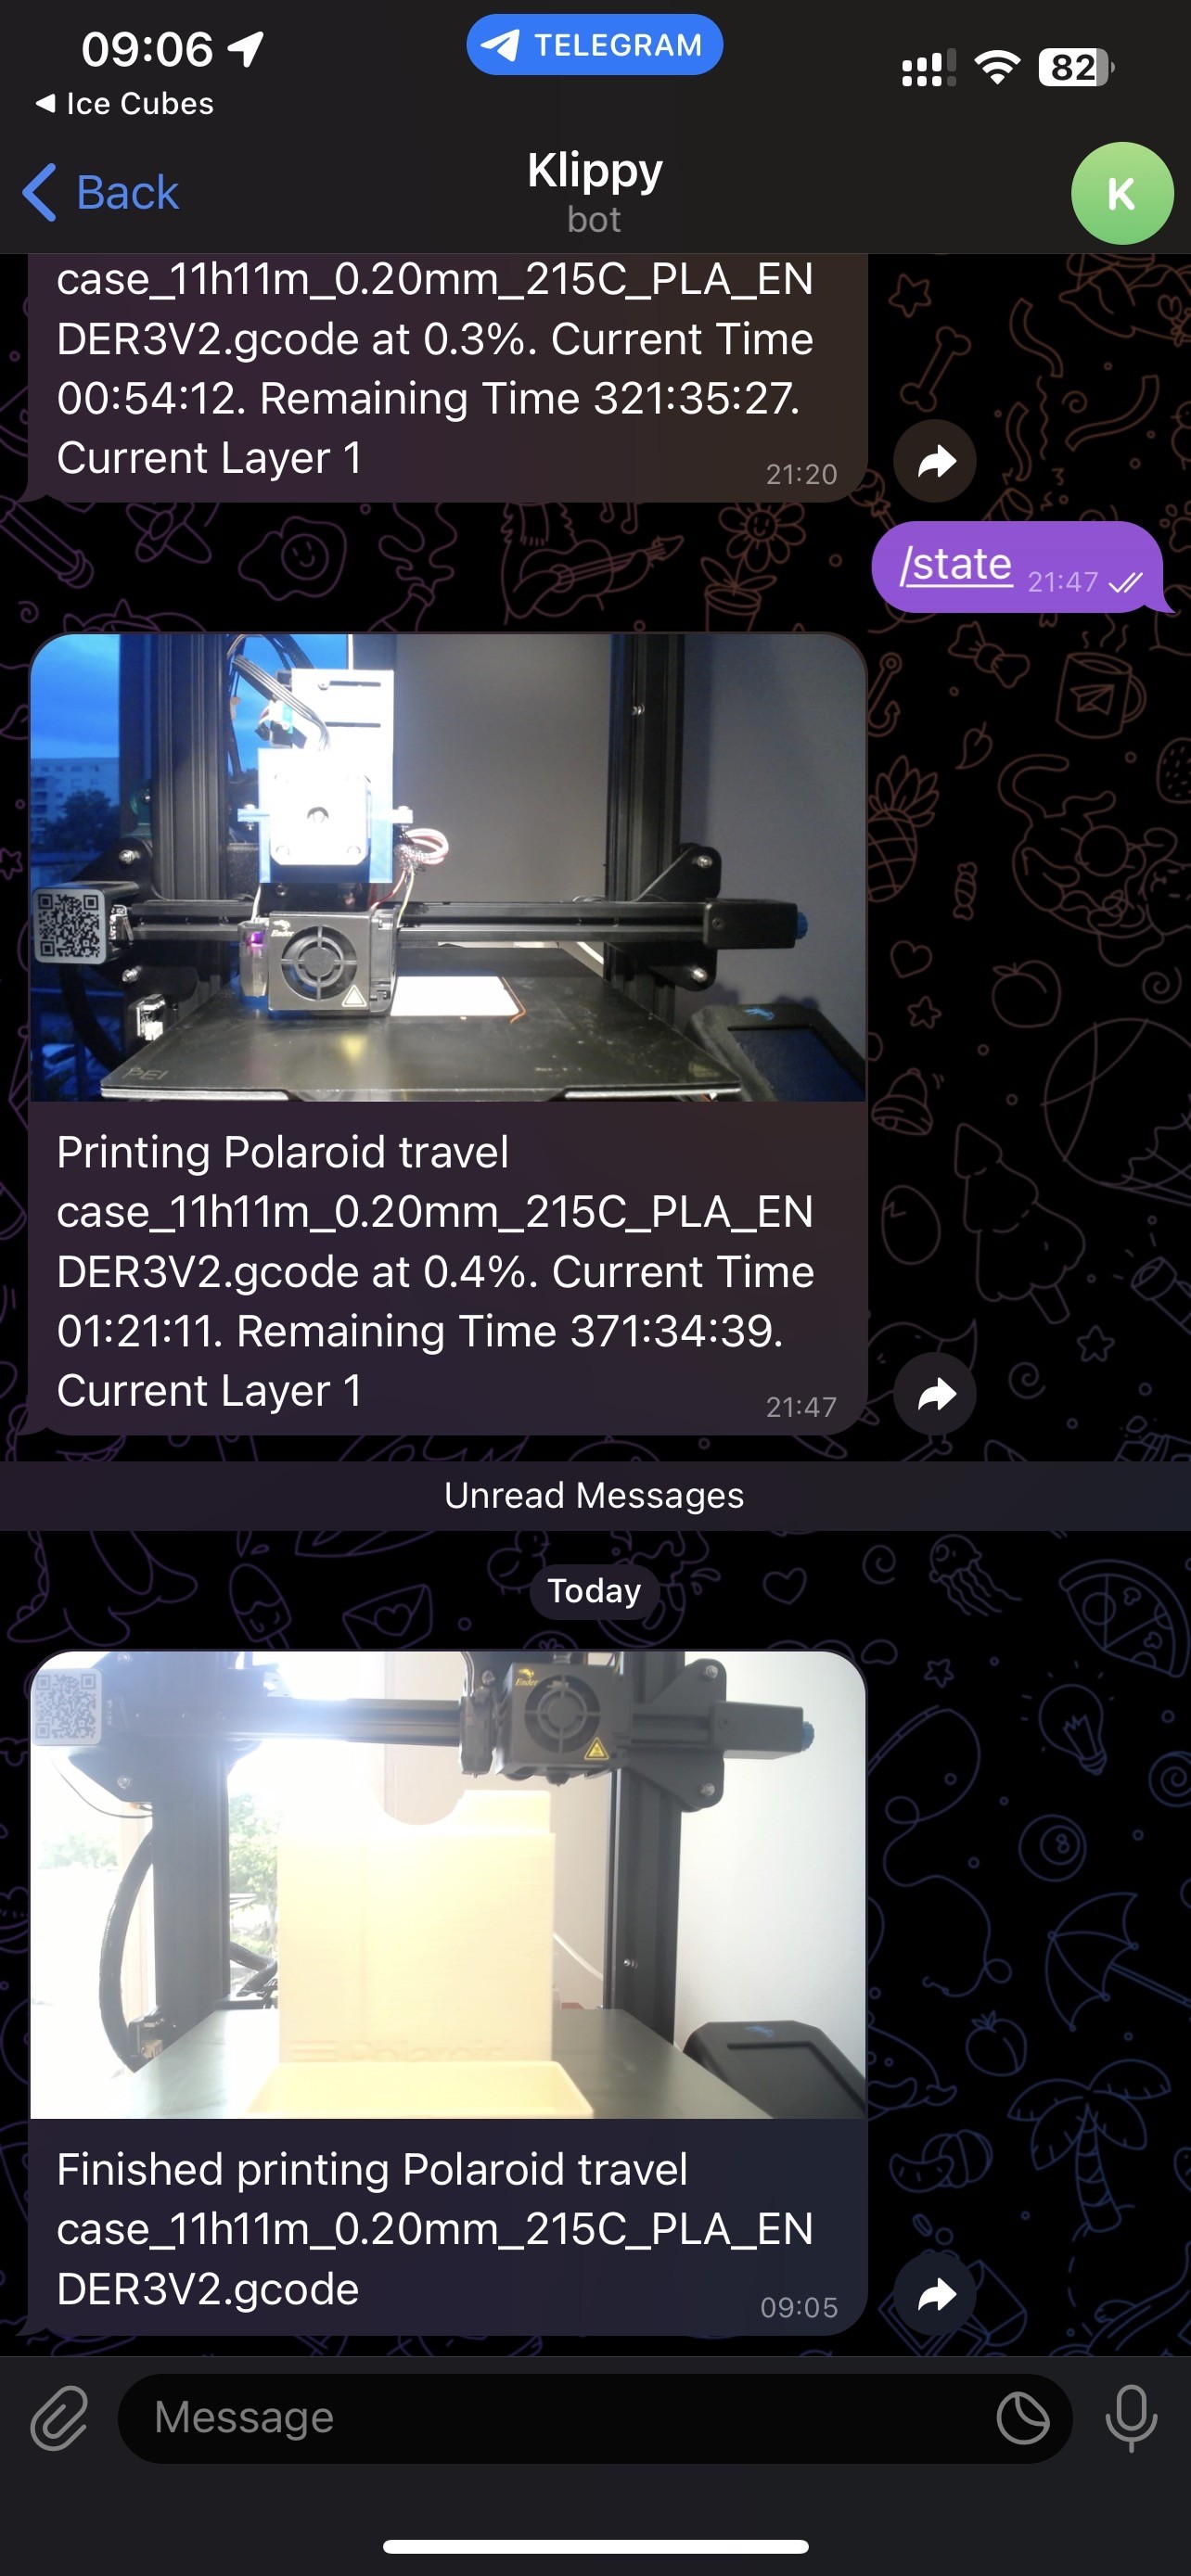 Screenshot of a Telegram conversation with a 3D printing bot. Three images show the 3D printing progress and completion of a Polaroid travel case. Associated status messages indicate printing progress and times.